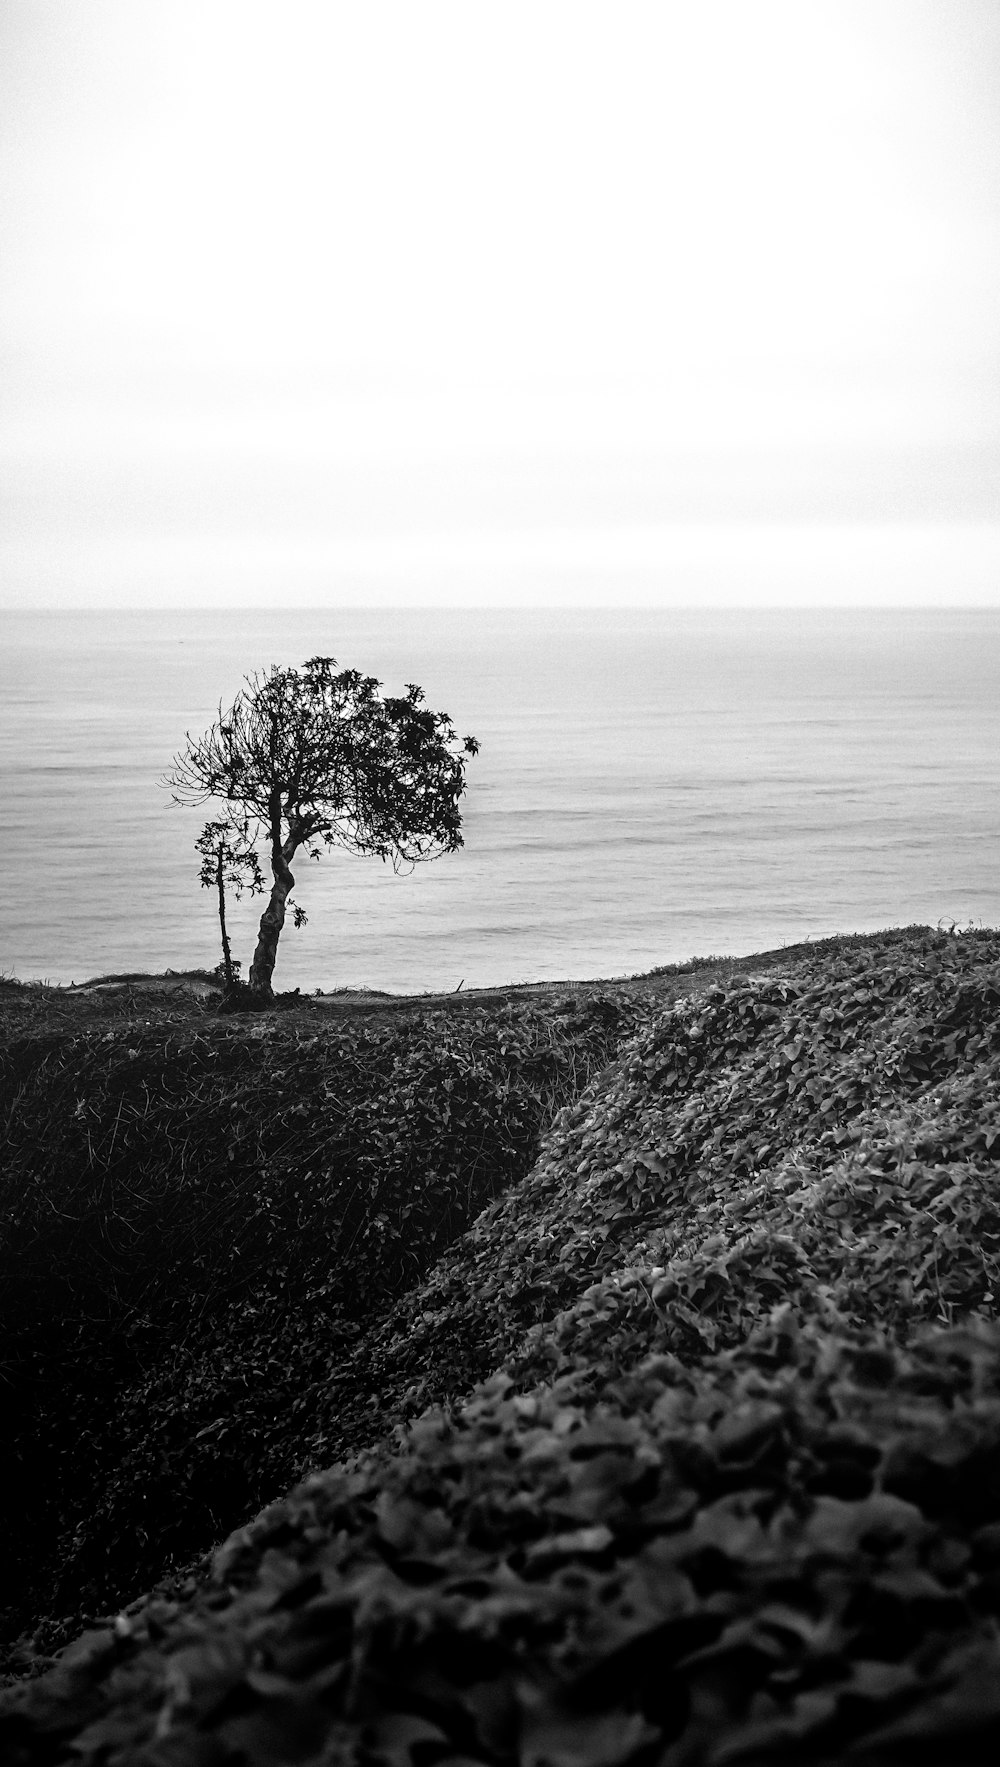 grayscale photo of tree on hill near body of water